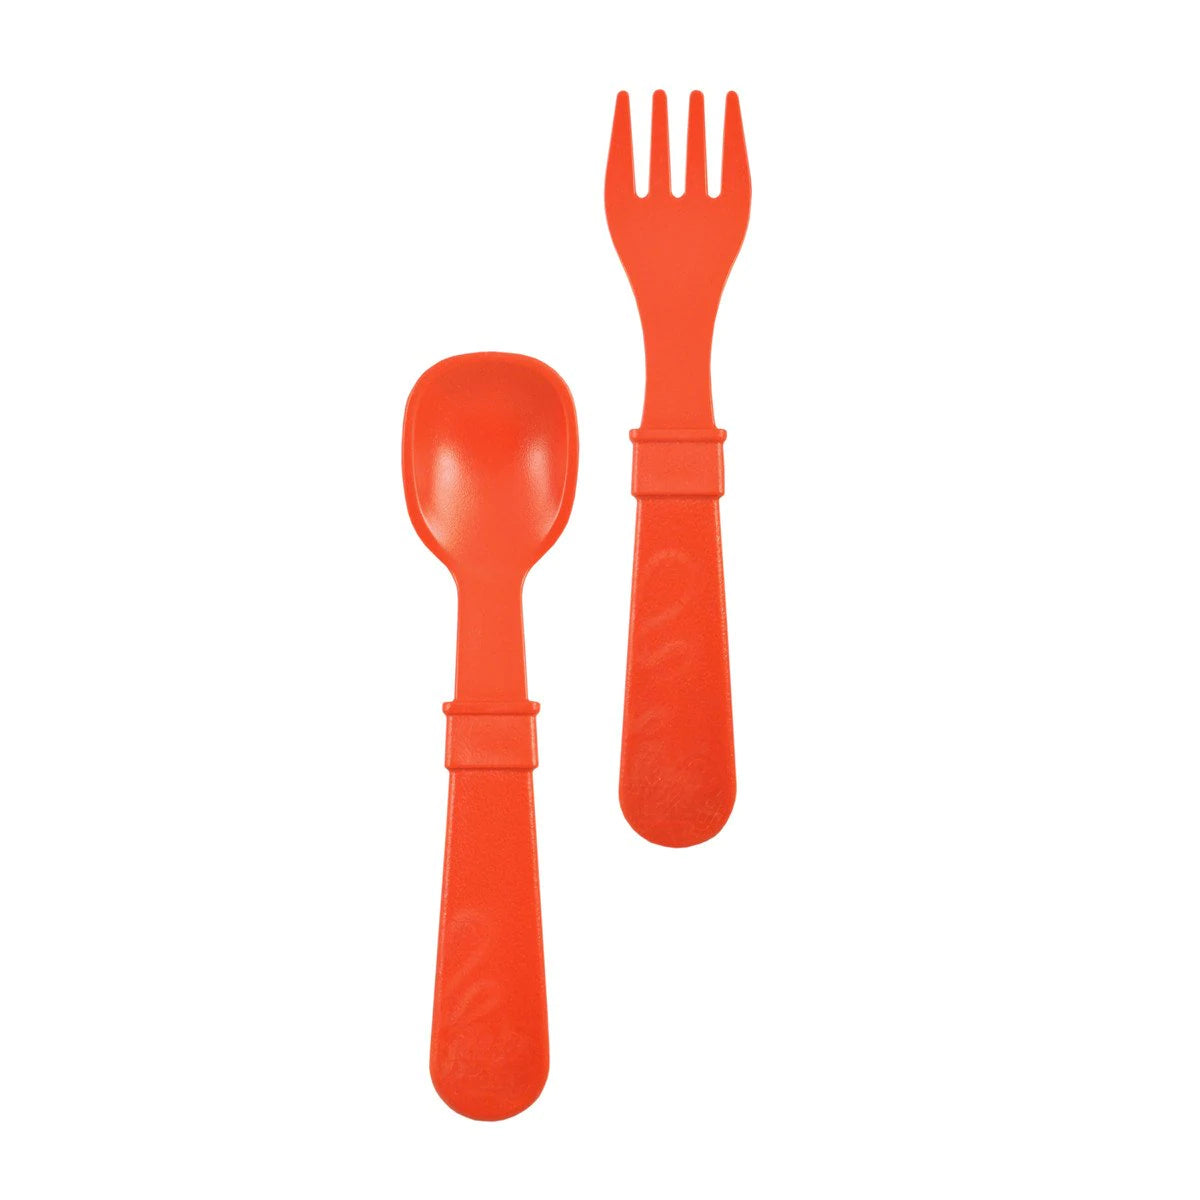 Re-Play Set of Two Utensils - Fork and Spoon Set